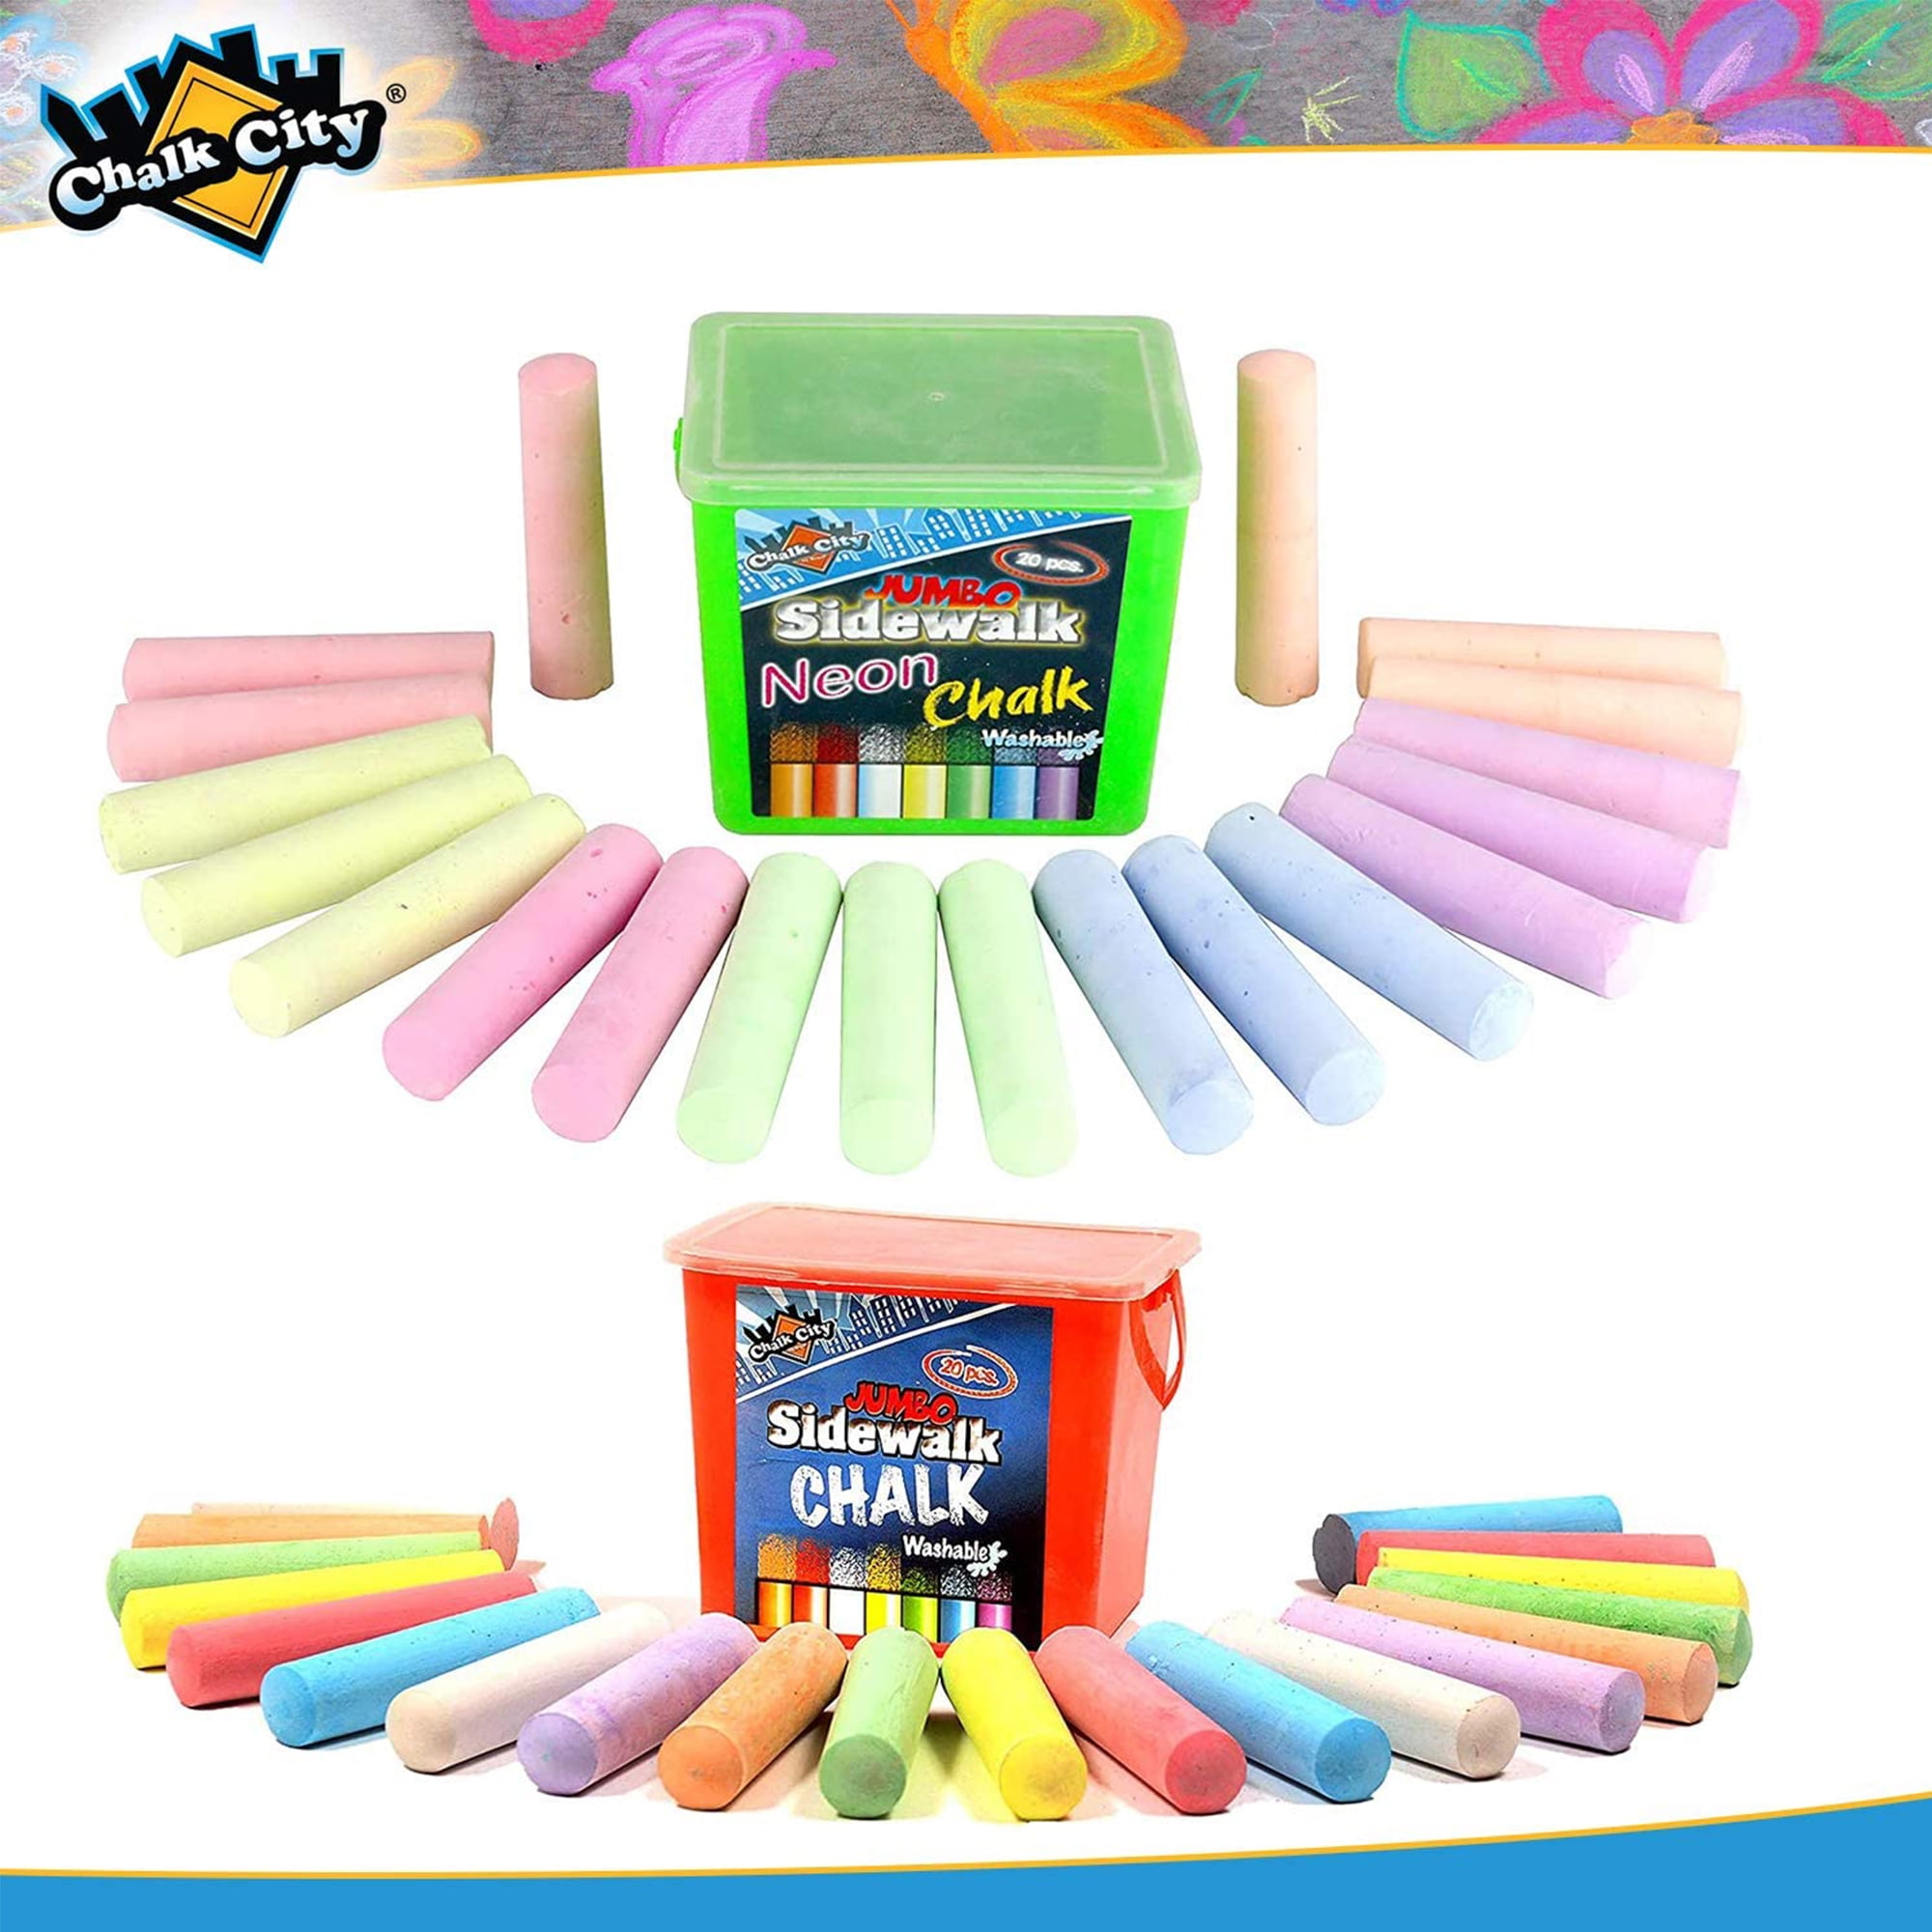 Jumbo Sidewalk Chalk Bulk 4 Pack Assorted Colors 80 Pieces Set Non-toxic  Washable Outdoor w/BCL Storage Bag Art Family School Street Playground  Colorful Carrying Case Easter Basket Stuffers Fillers 